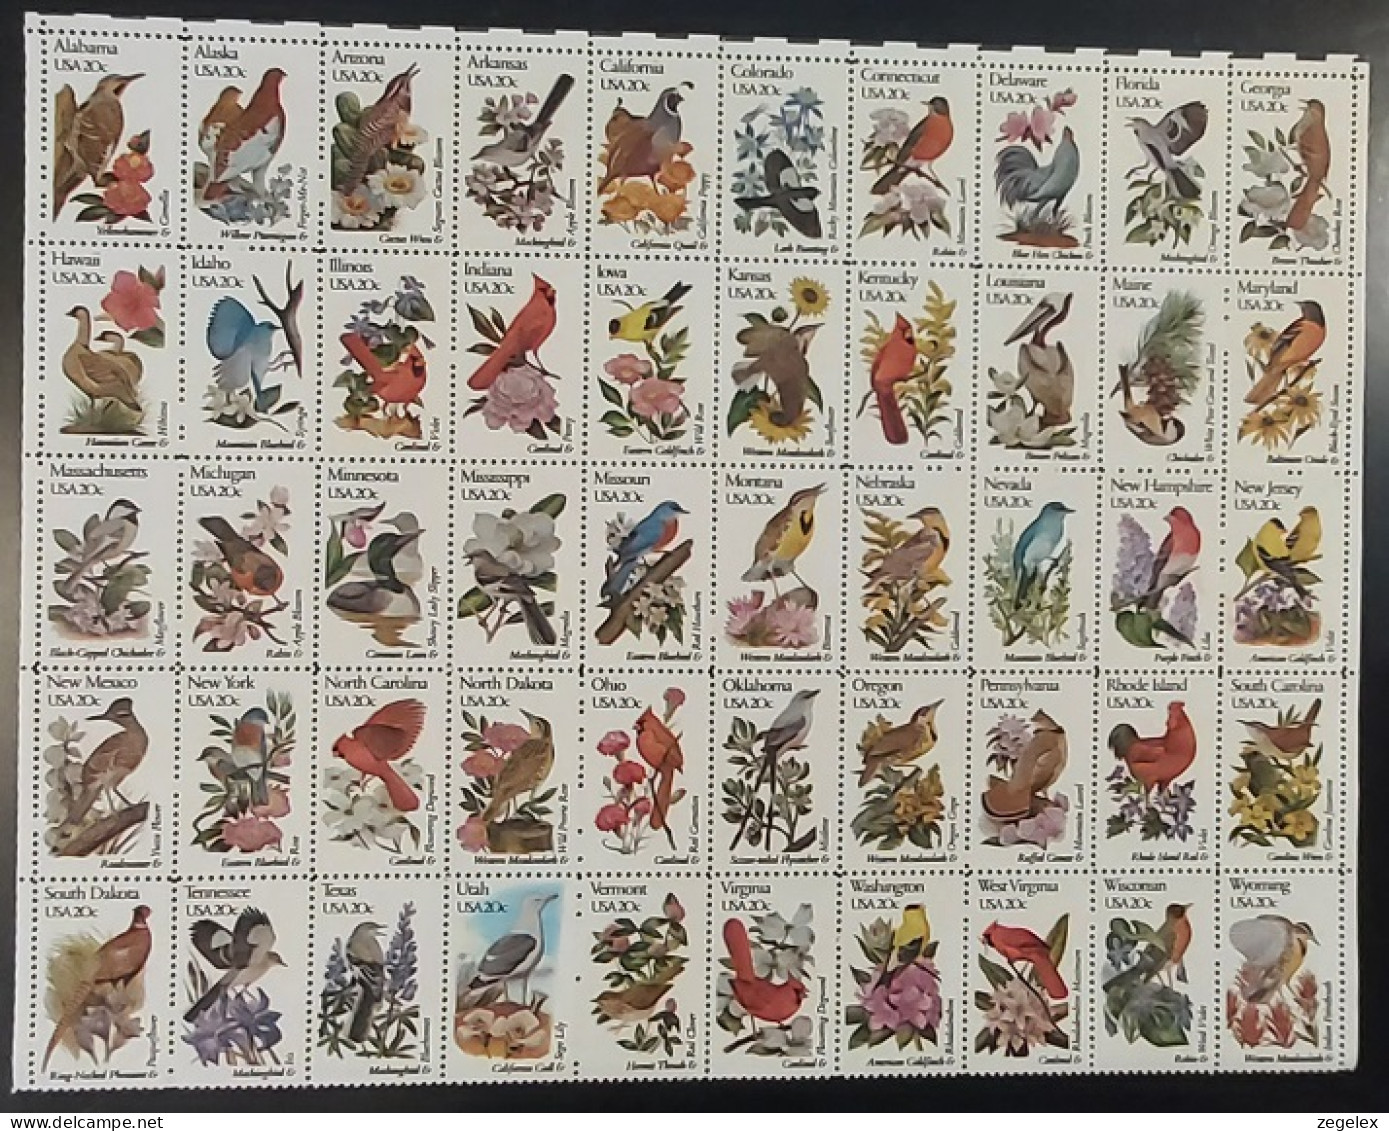 USA 1982 State Birds And Flowers. Sheet Perf 10,5x11,25  50 Values.  Scott No.1953-2002b. See Description - Sheets